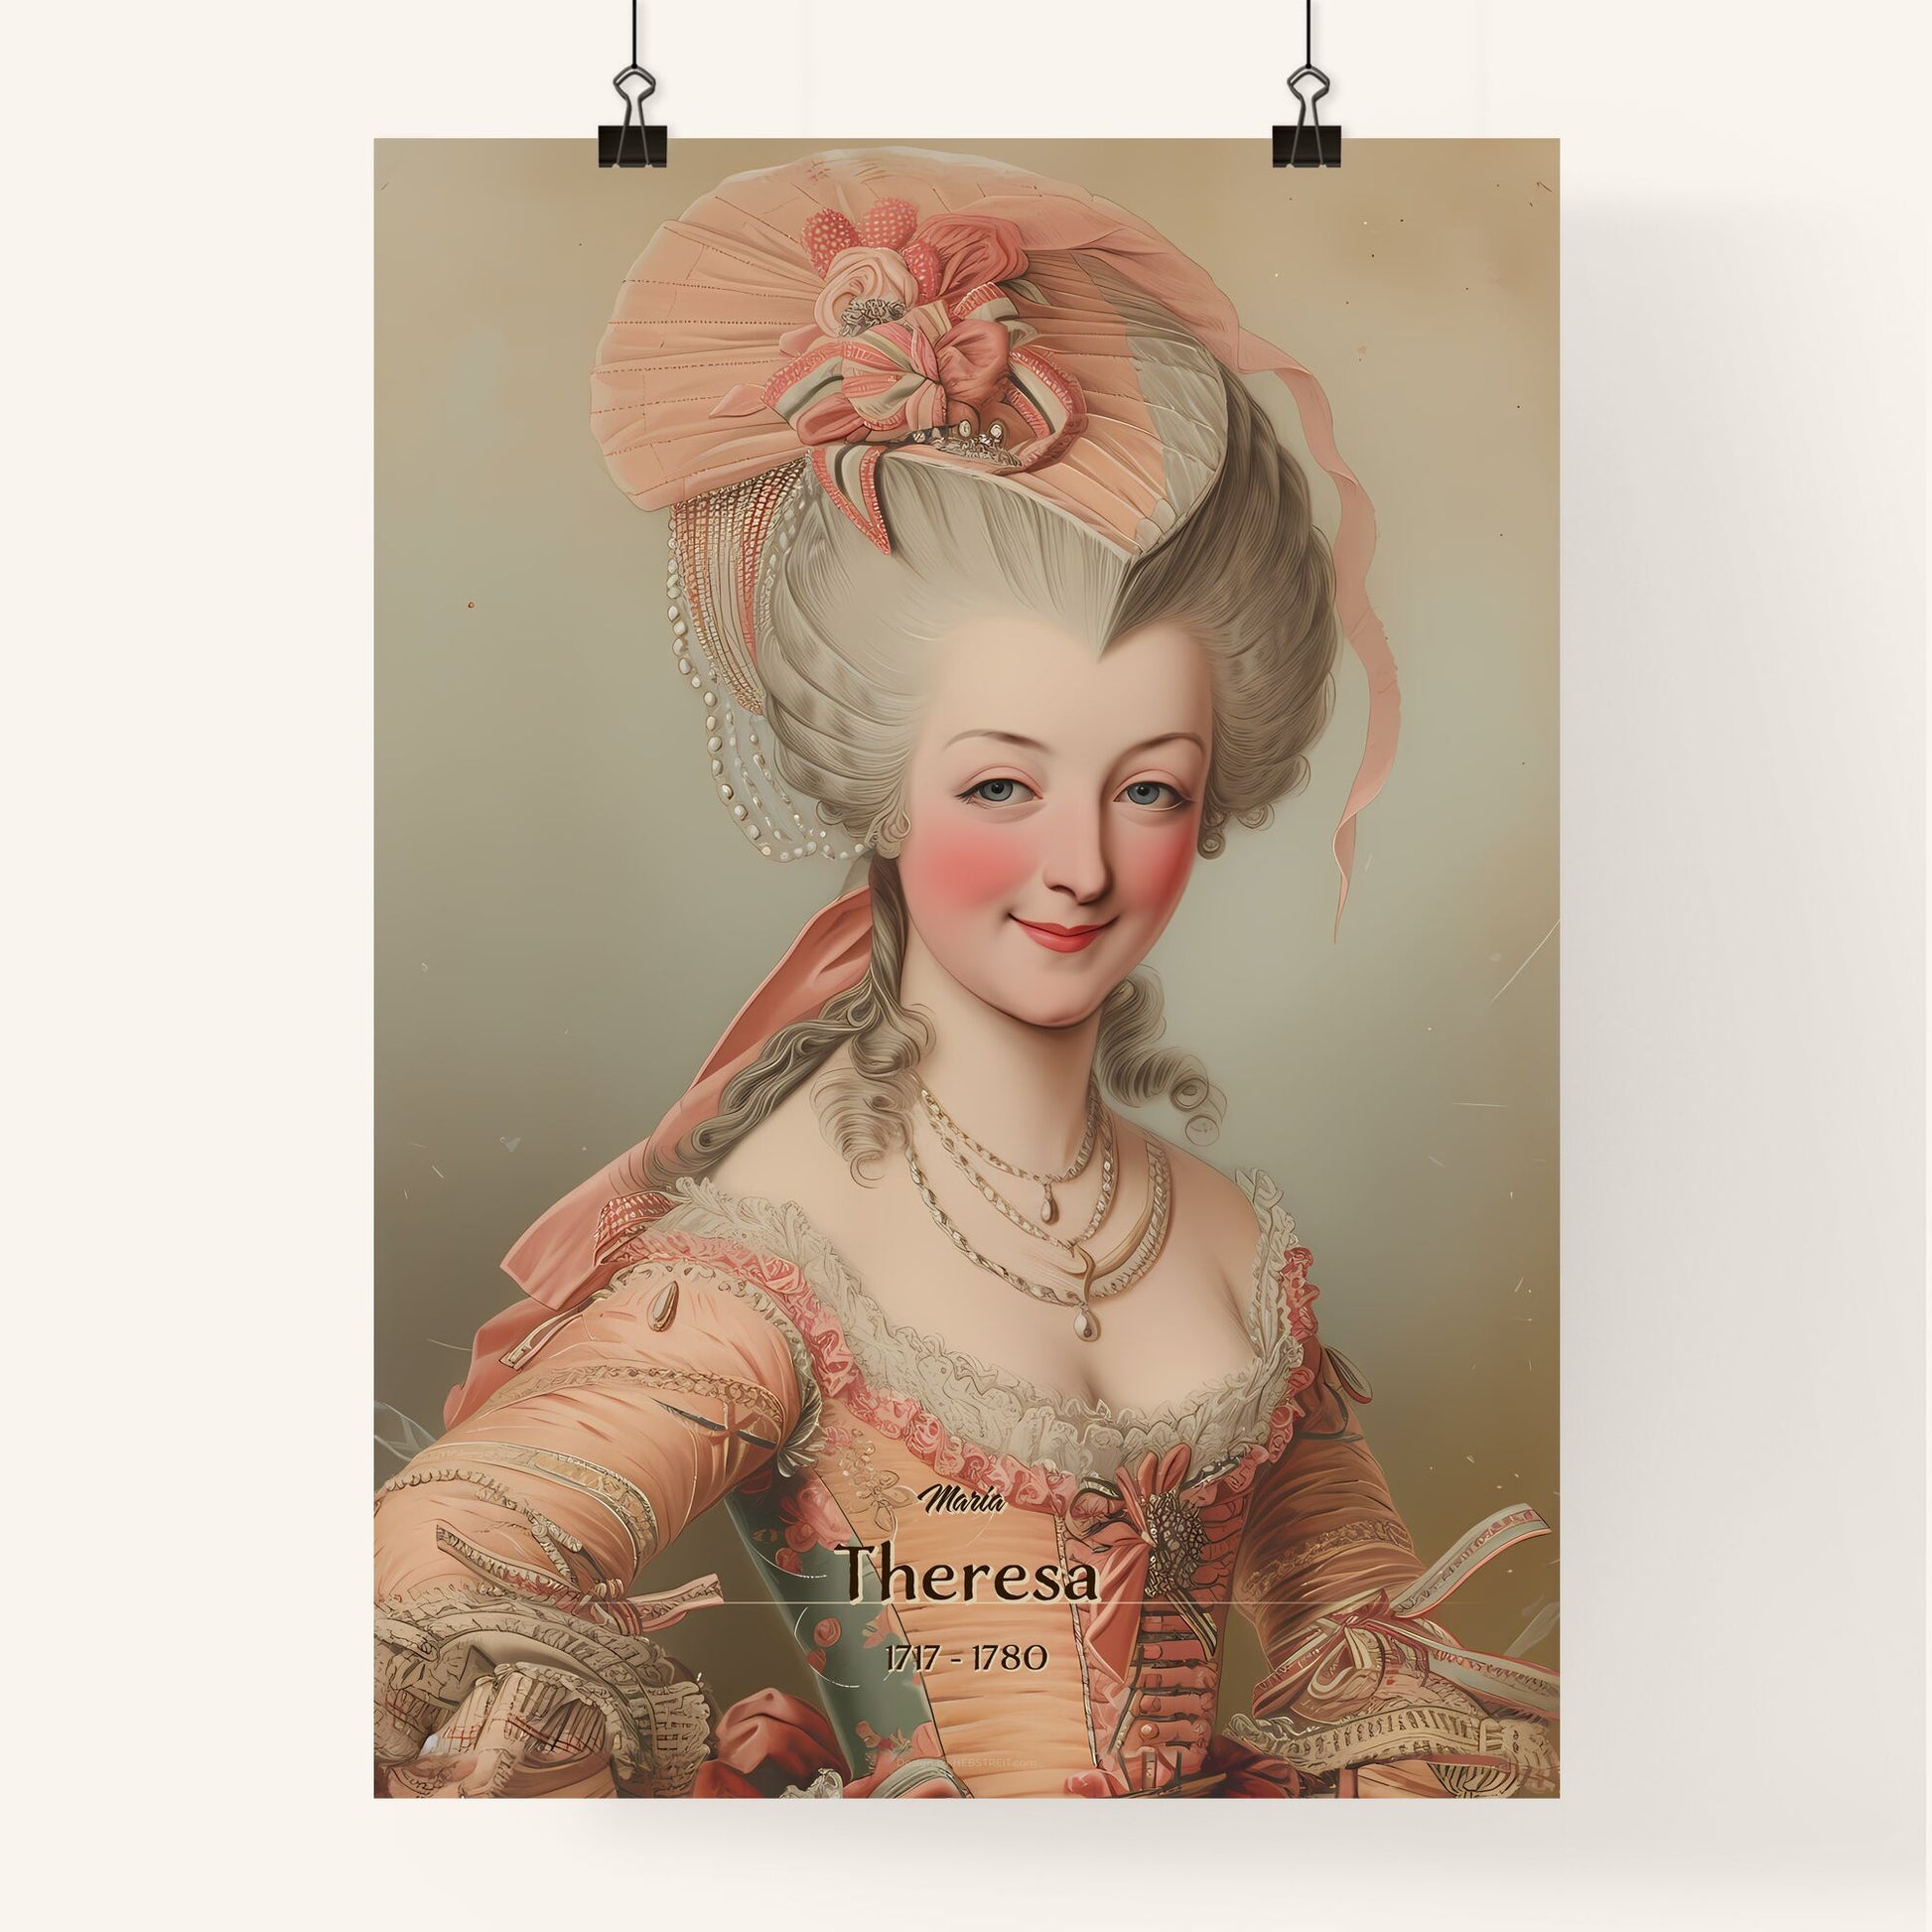 Maria, Theresa, 1717 - 1780, A Poster of a woman in a dress Default Title